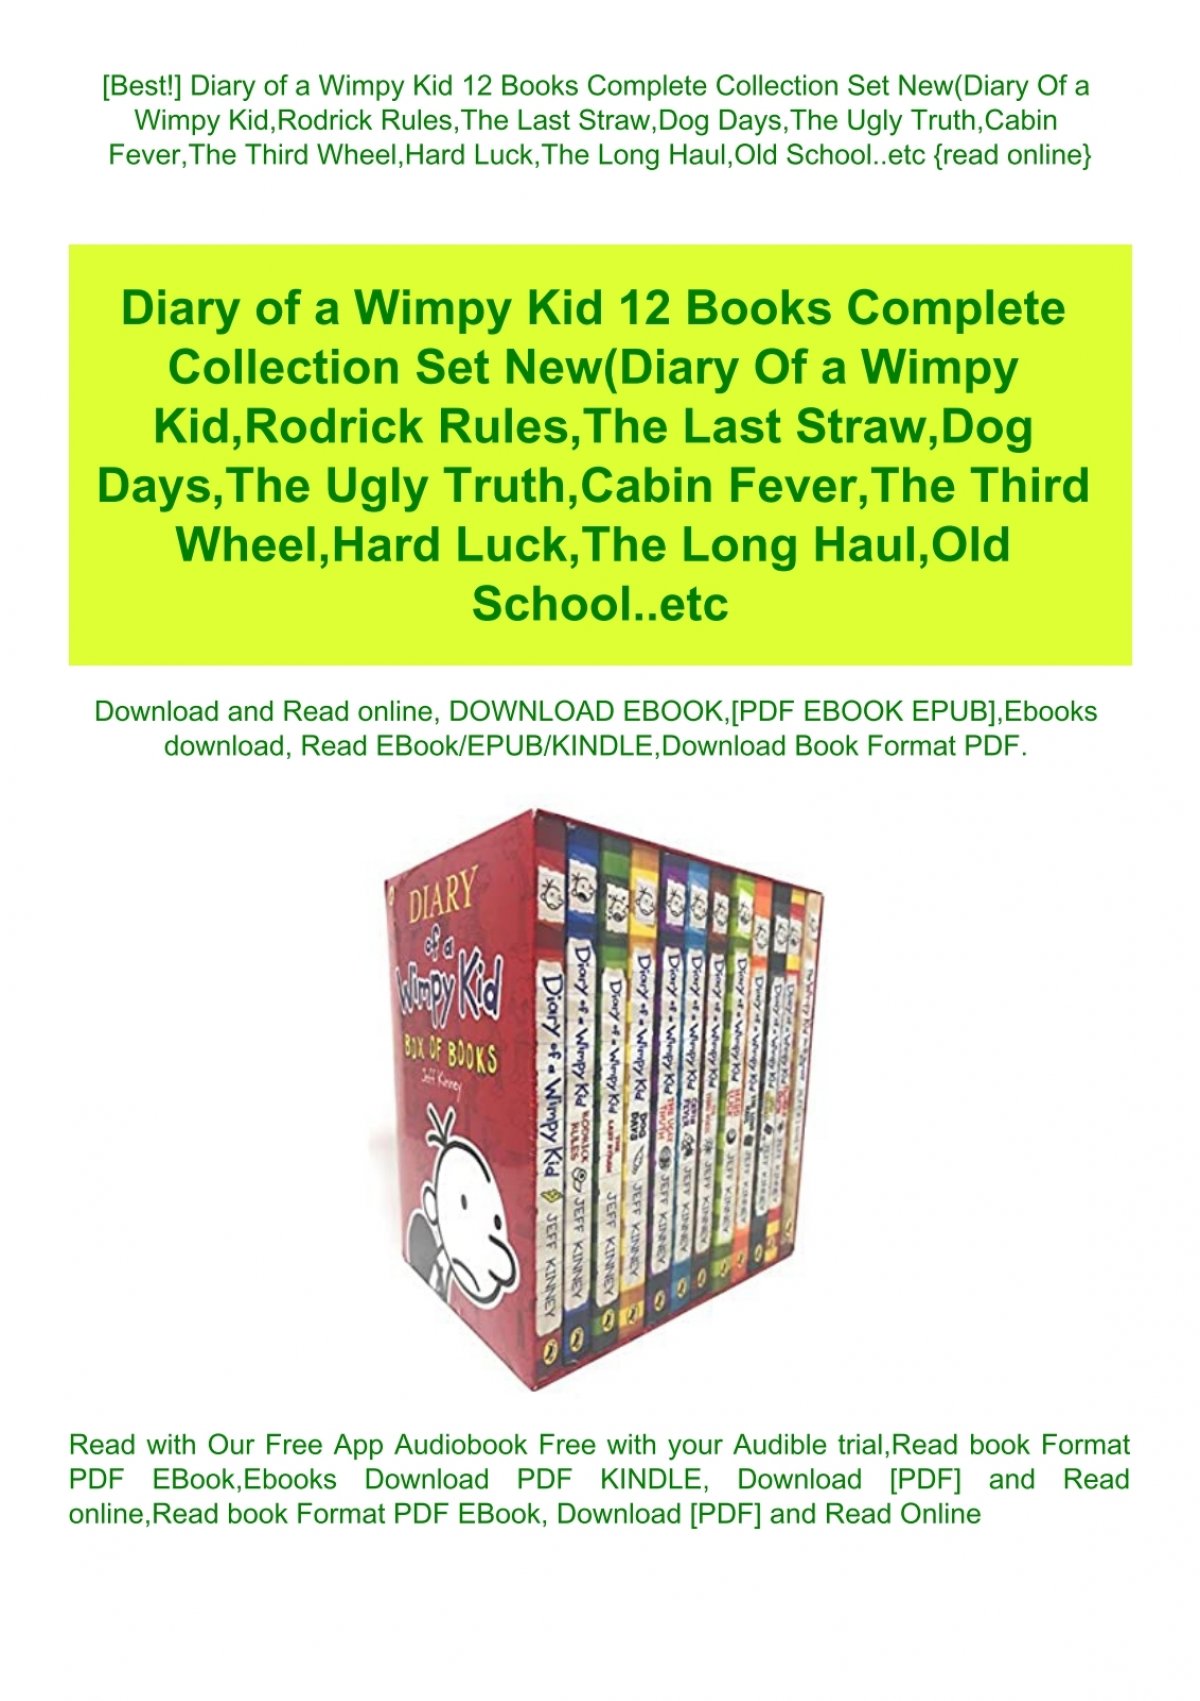 Best Diary Of A Wimpy Kid 12 Books Complete Collection Set New Diary Of A Wimpy Kid Rodrick Rules The Last Straw Dog Days The Ugly Truth Cabin Fever The Third Wheel Hard